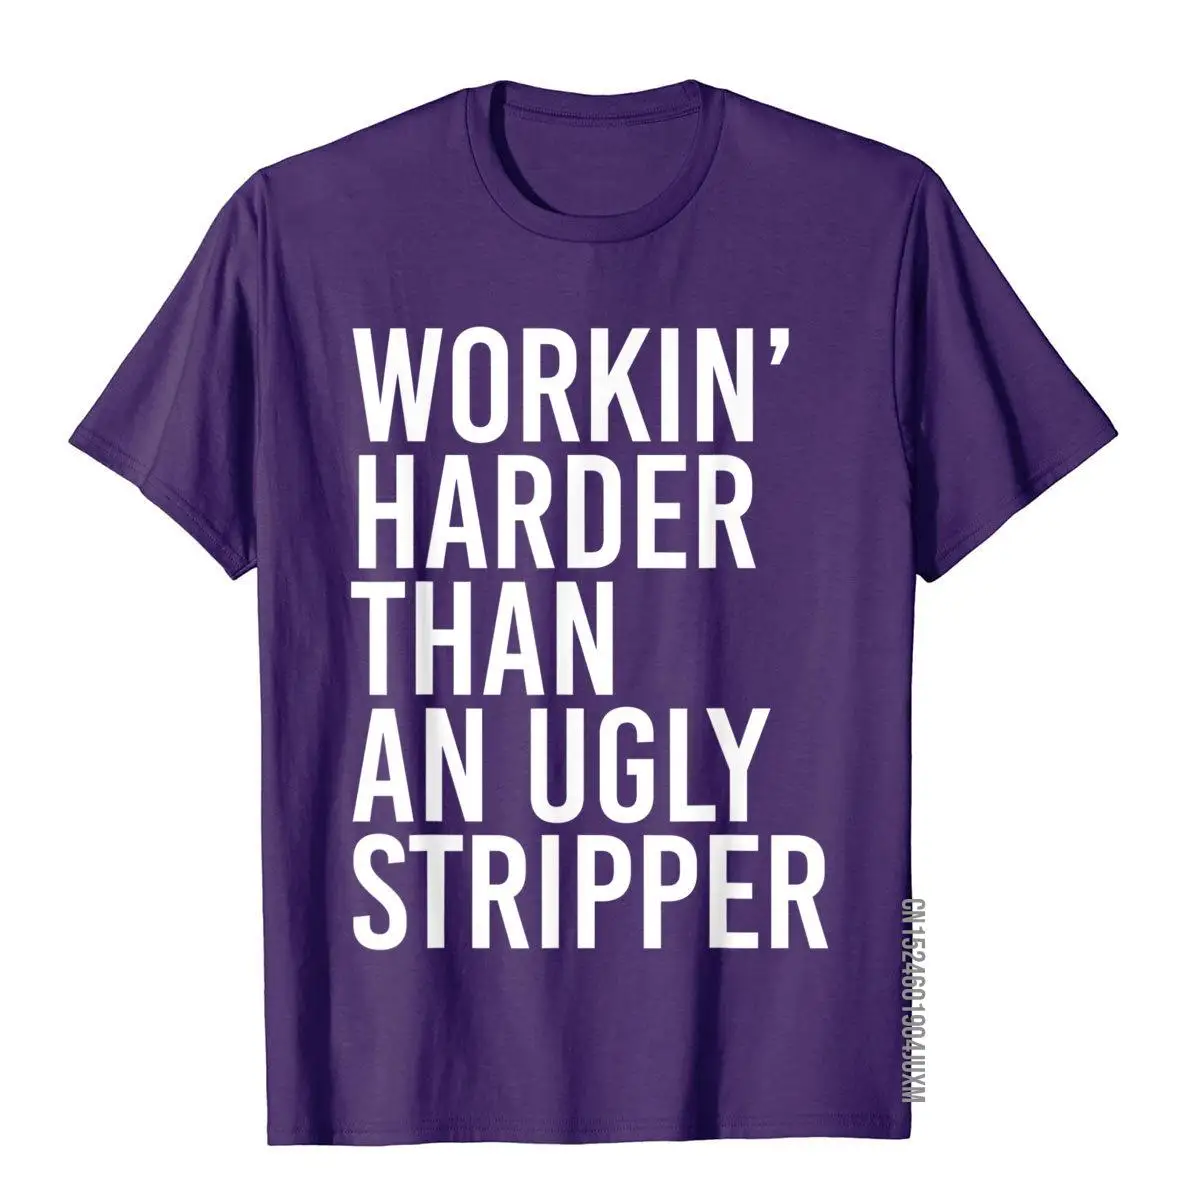 Mens Working Harder Than An Ugly Stripper Funny T-Shirt__97A3308purple